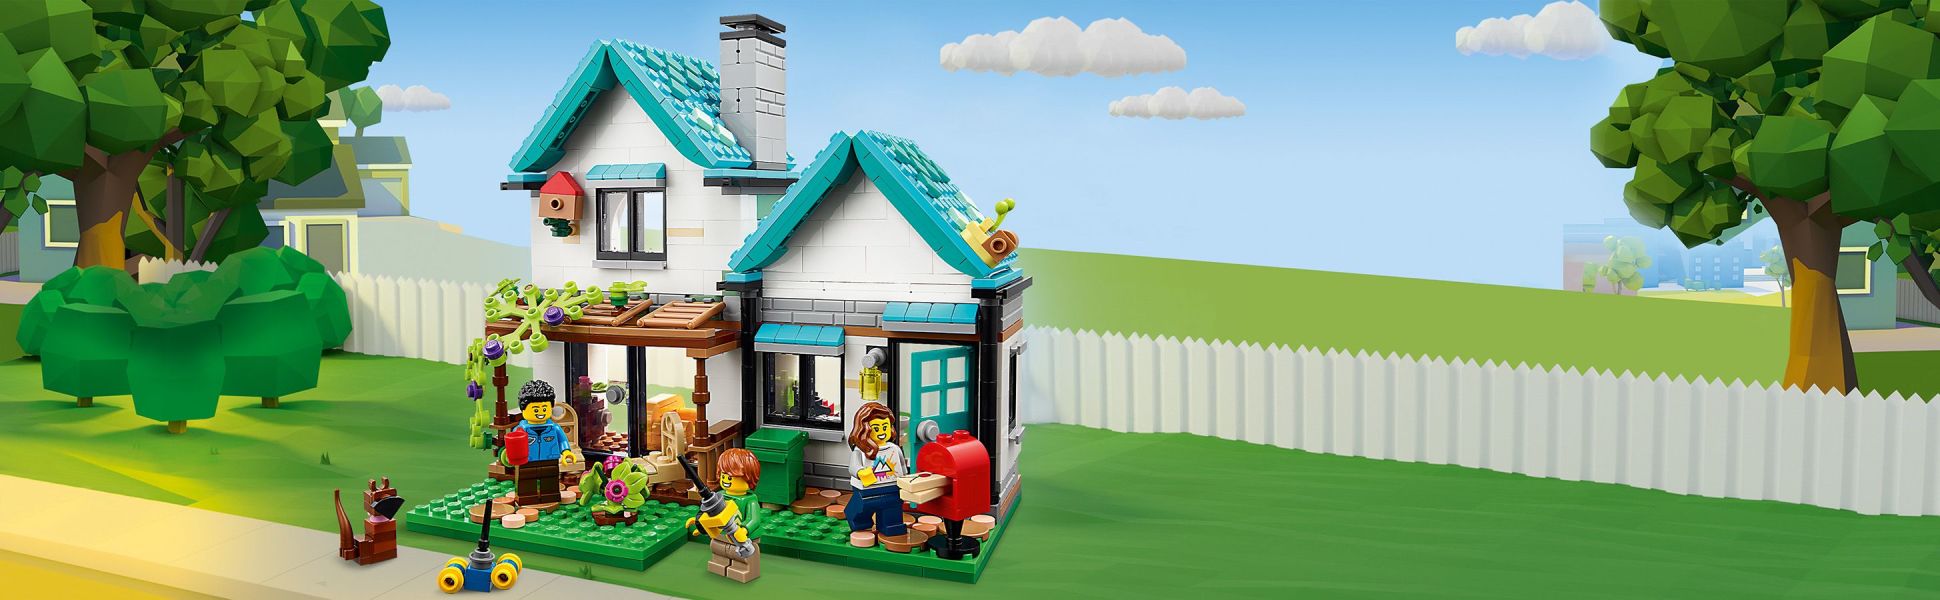 LEGO Creator 3 in 1 Cozy House Building Kit, Rebuild into 3 Different Houses,  Includes Family Minifigures and Accessories, DIY Building Toy Ideas for  Outdoor Play for Kids, Boys and Girls, 31139 